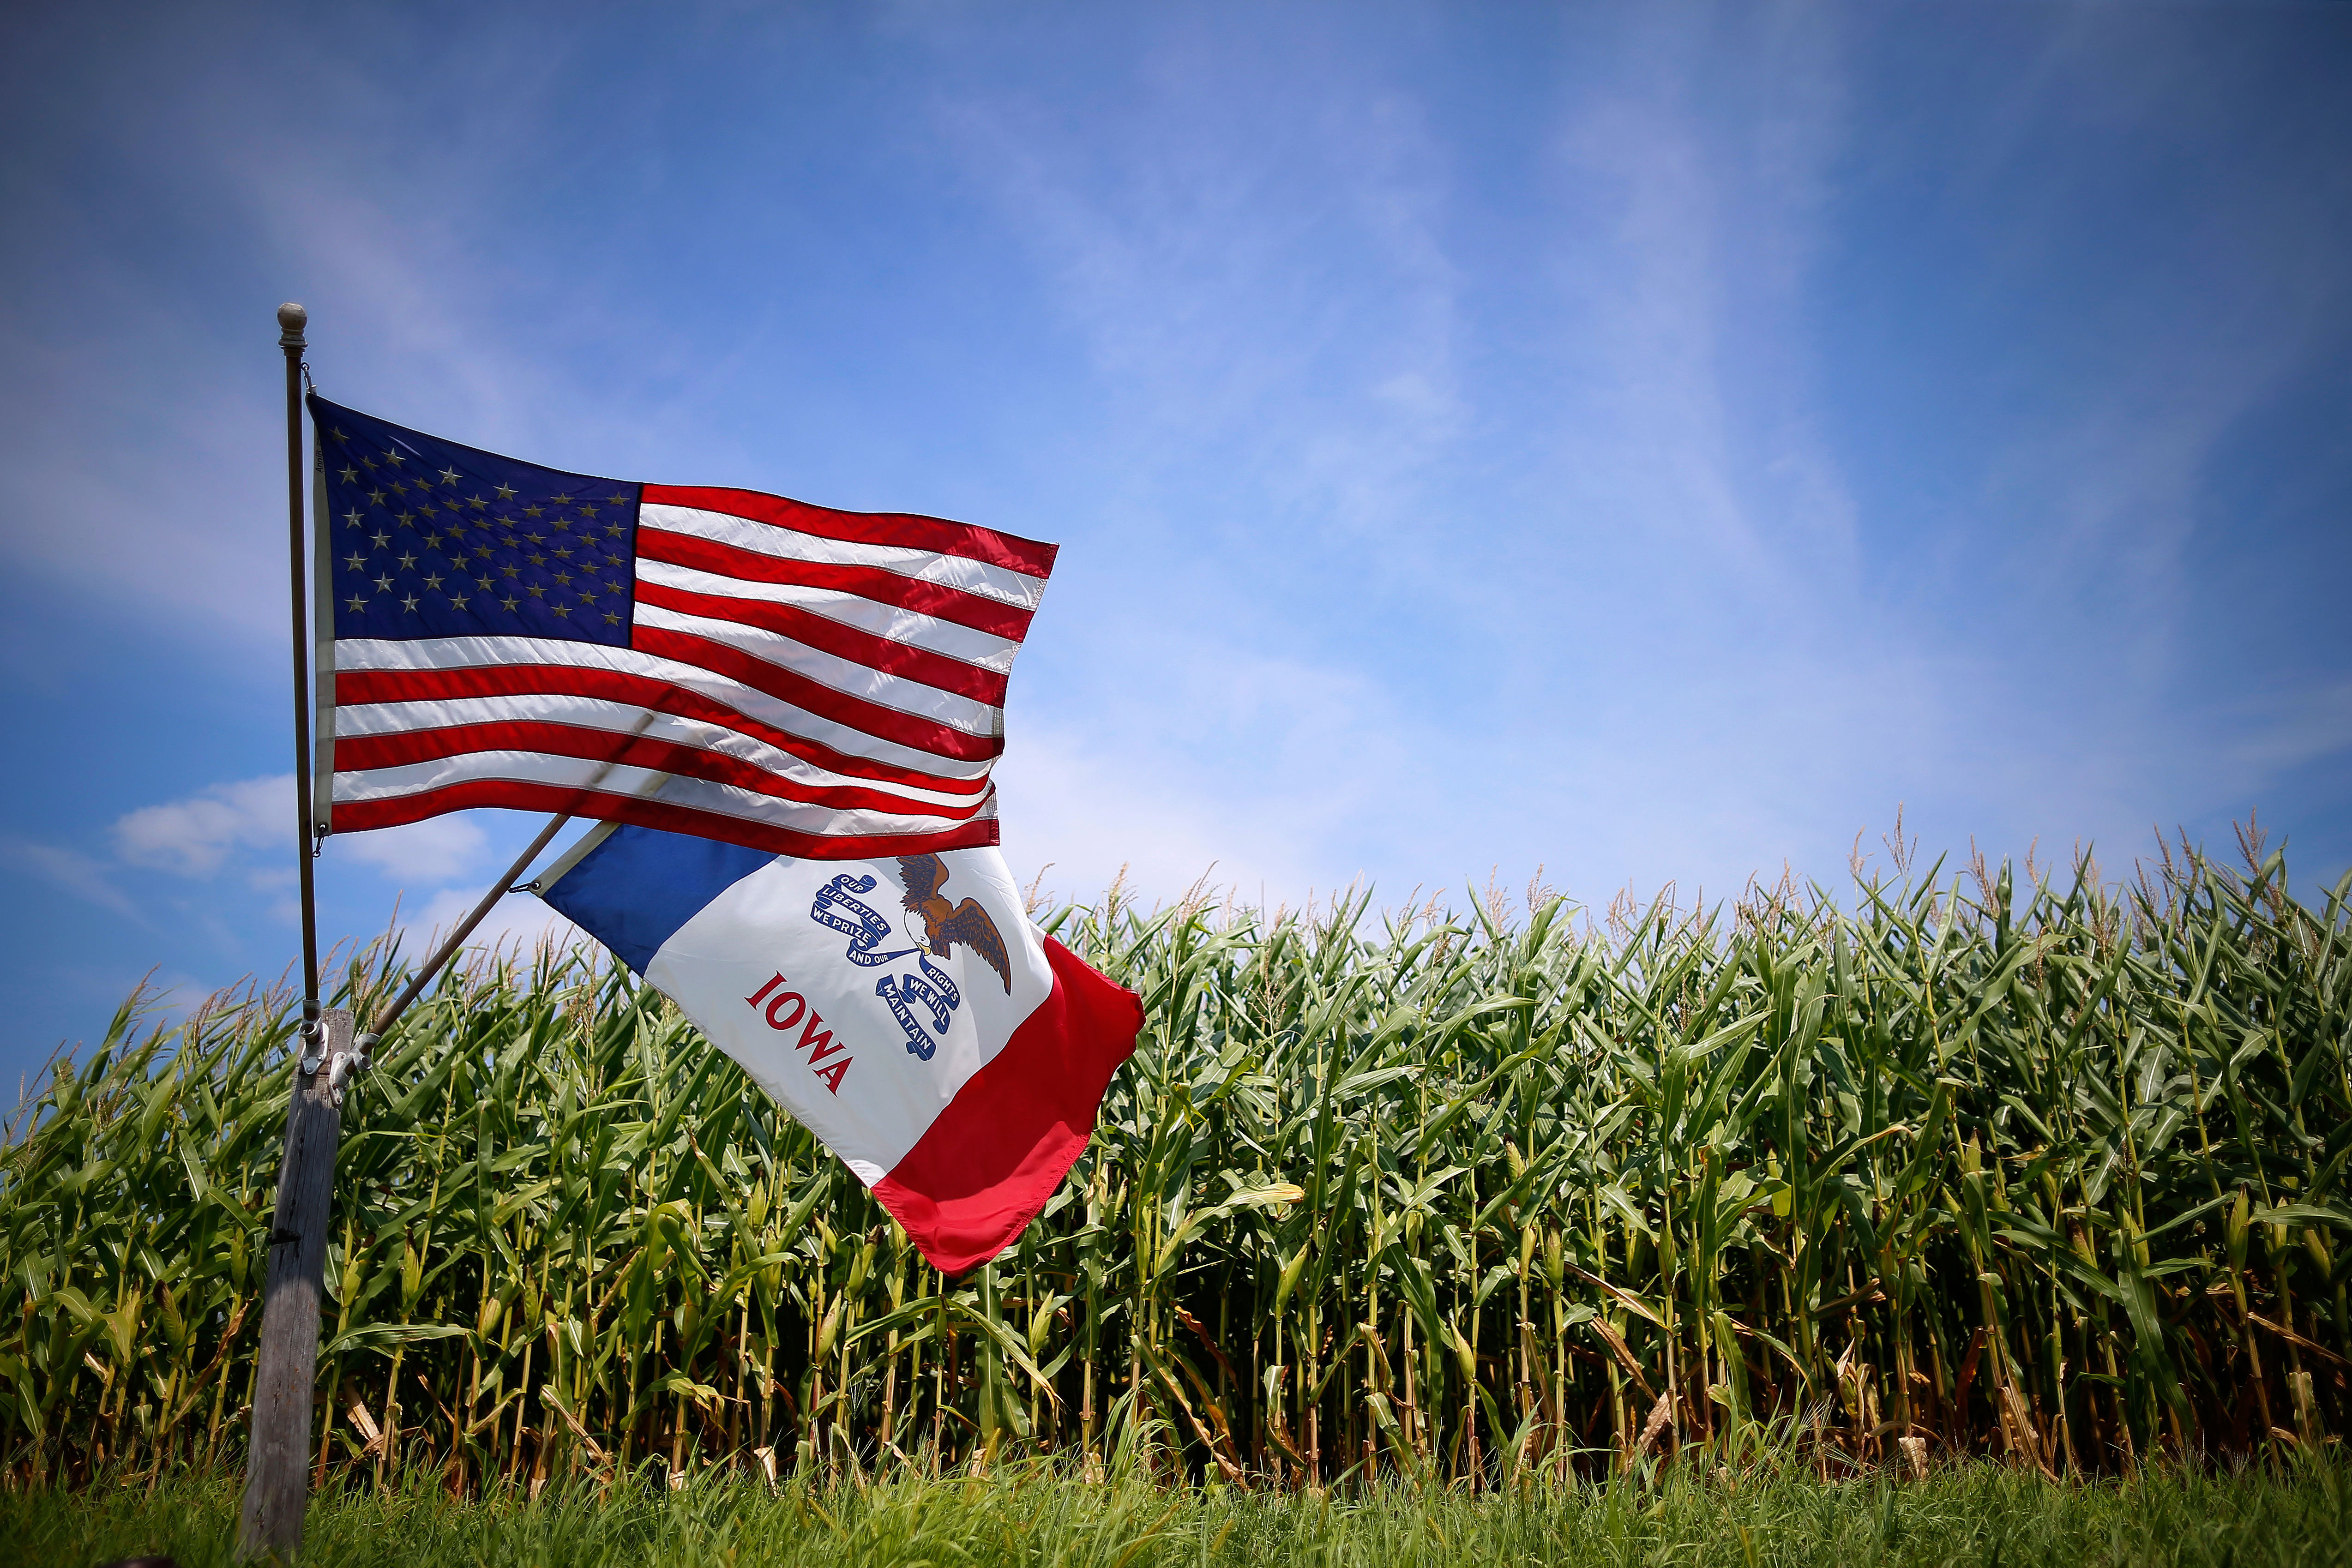 A U.S. and Iowa state flags are seen next to a corn field in Grand Mound